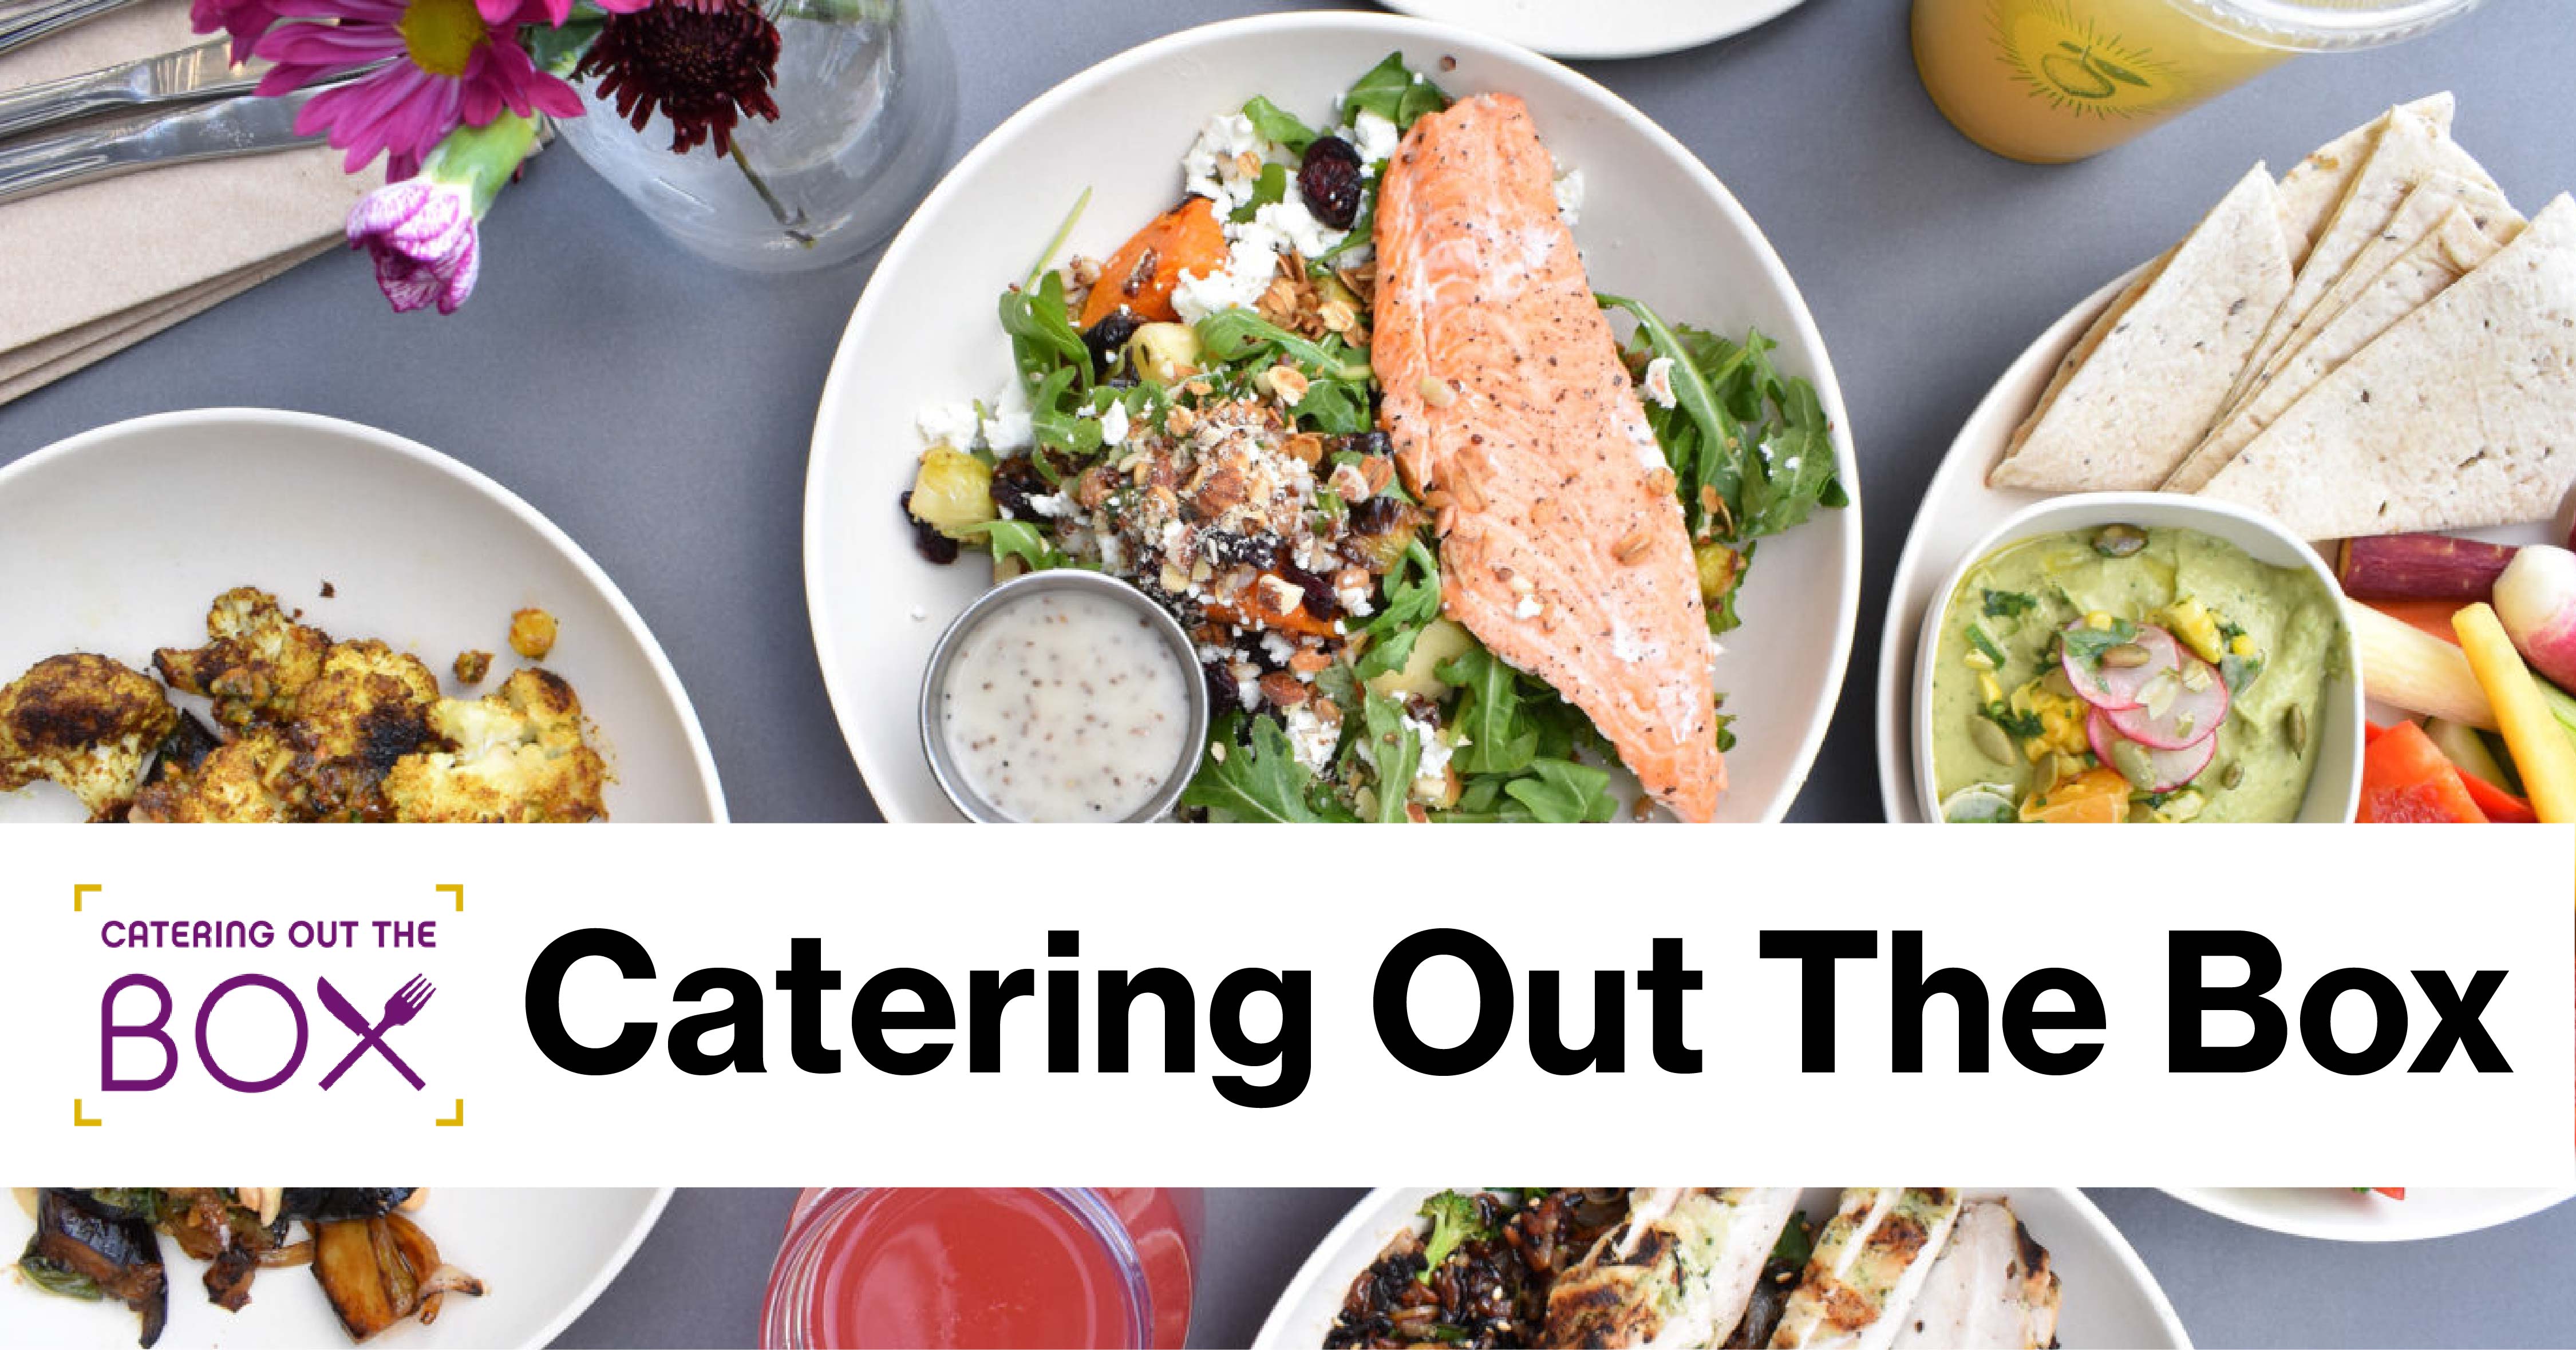 Three dishes of food with "Catering Out of the Box" and logo